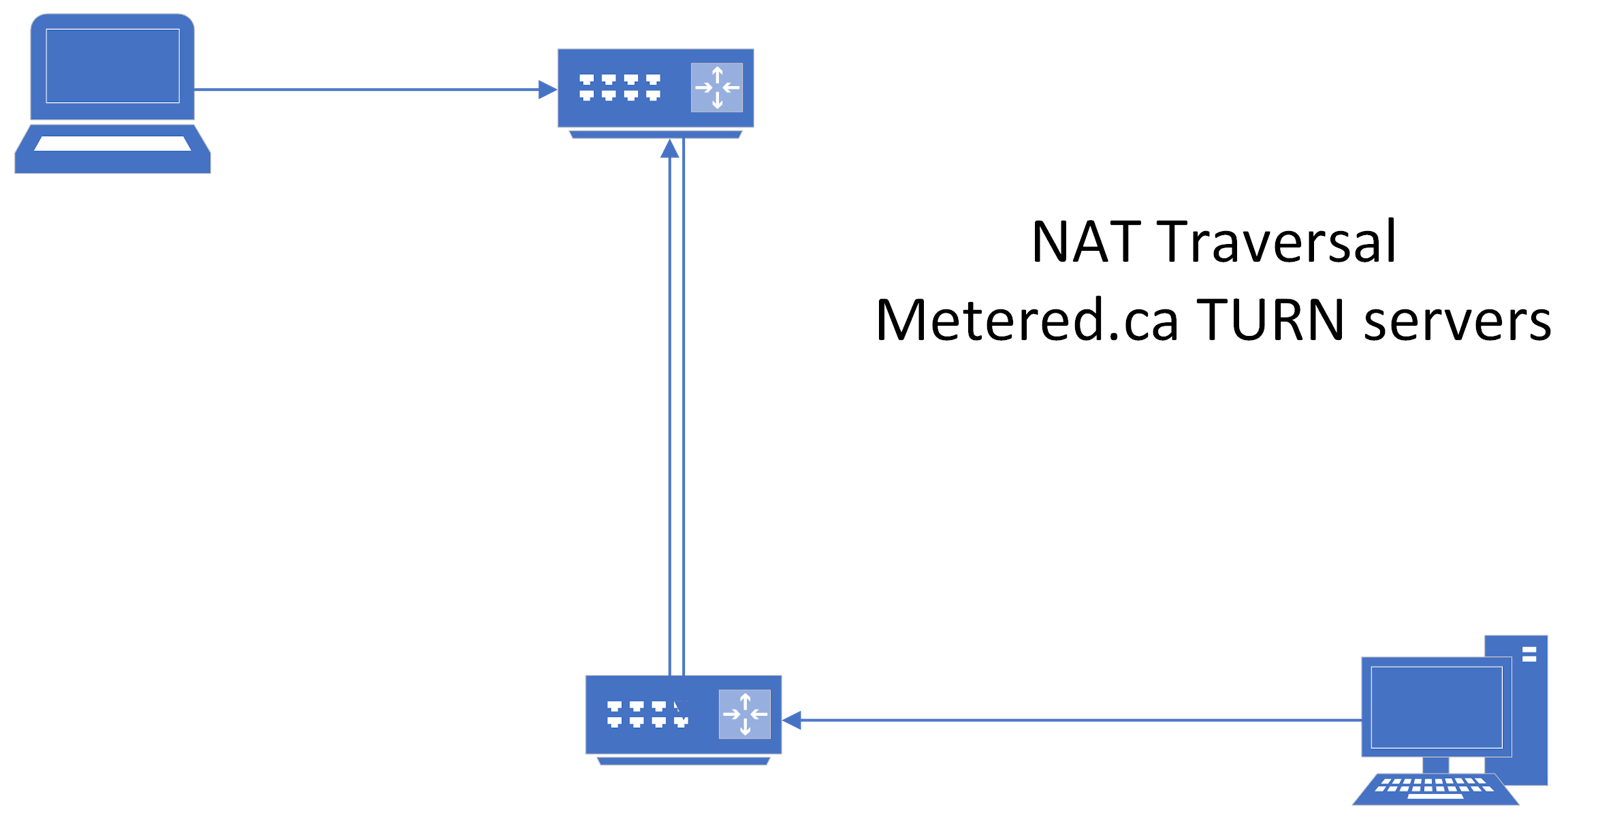 NAT traversal: How does it work?